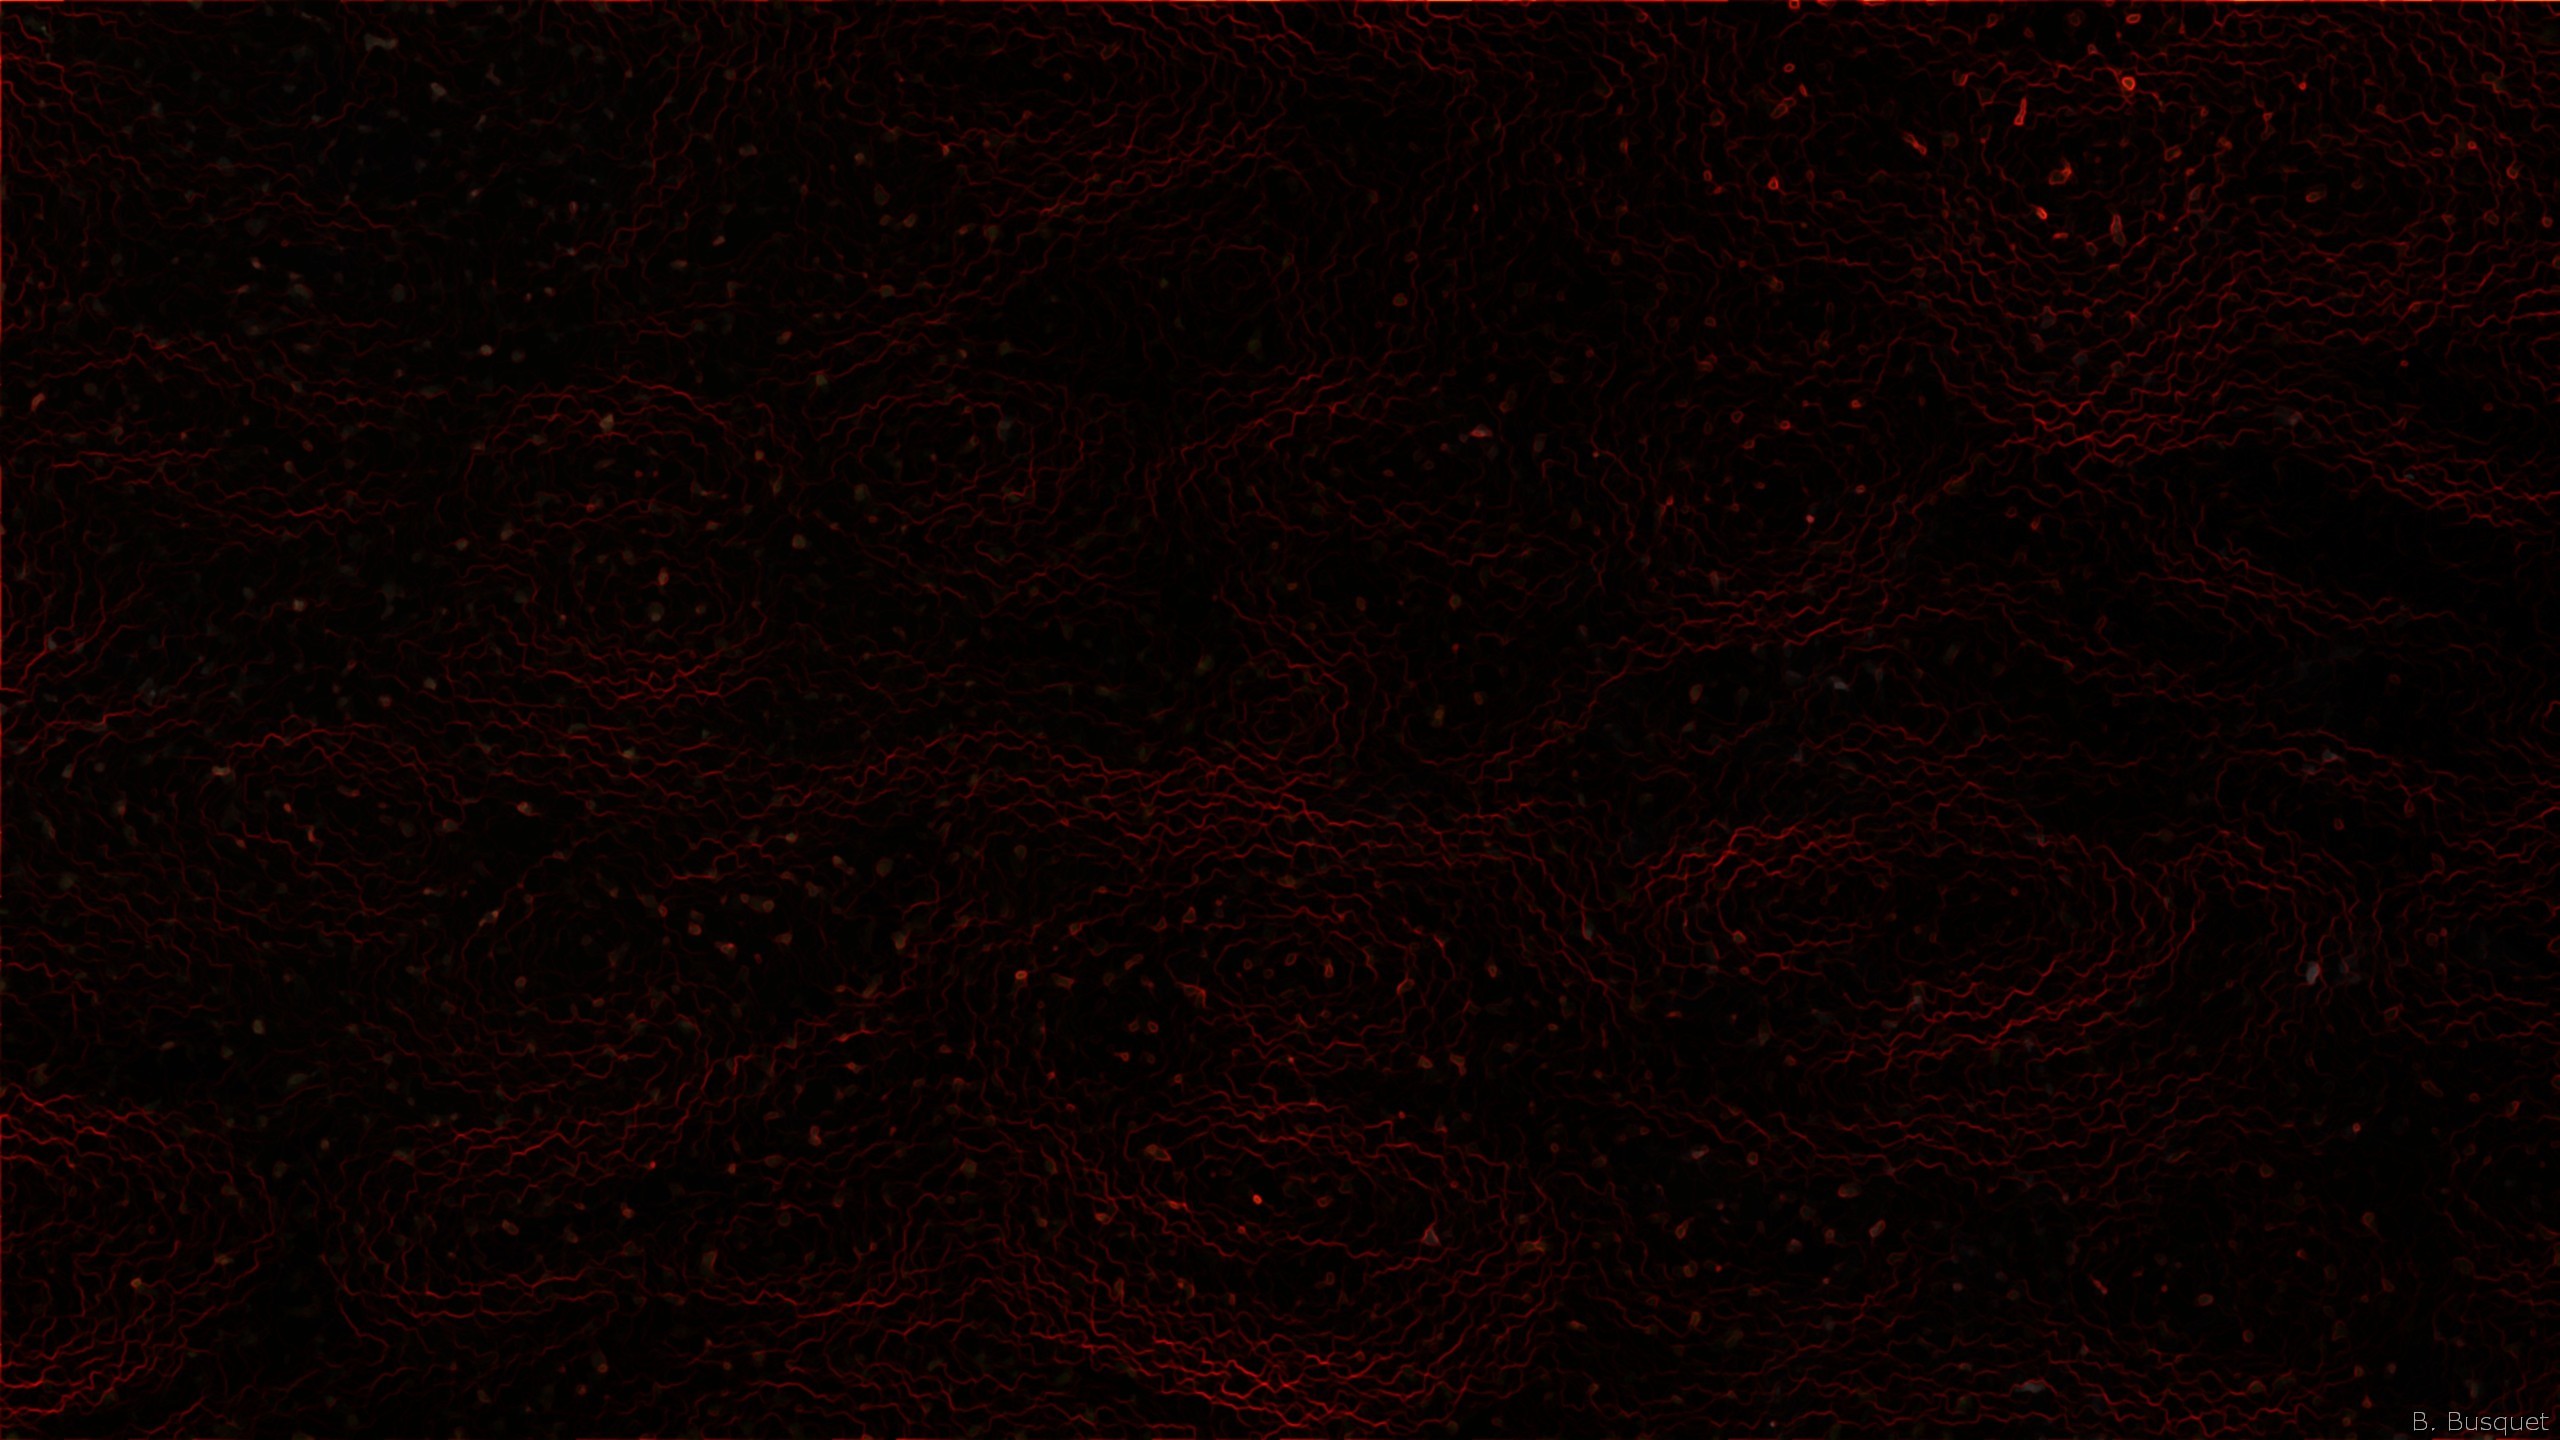 Abstract wallpaper with a dark pattern in black and red colors.